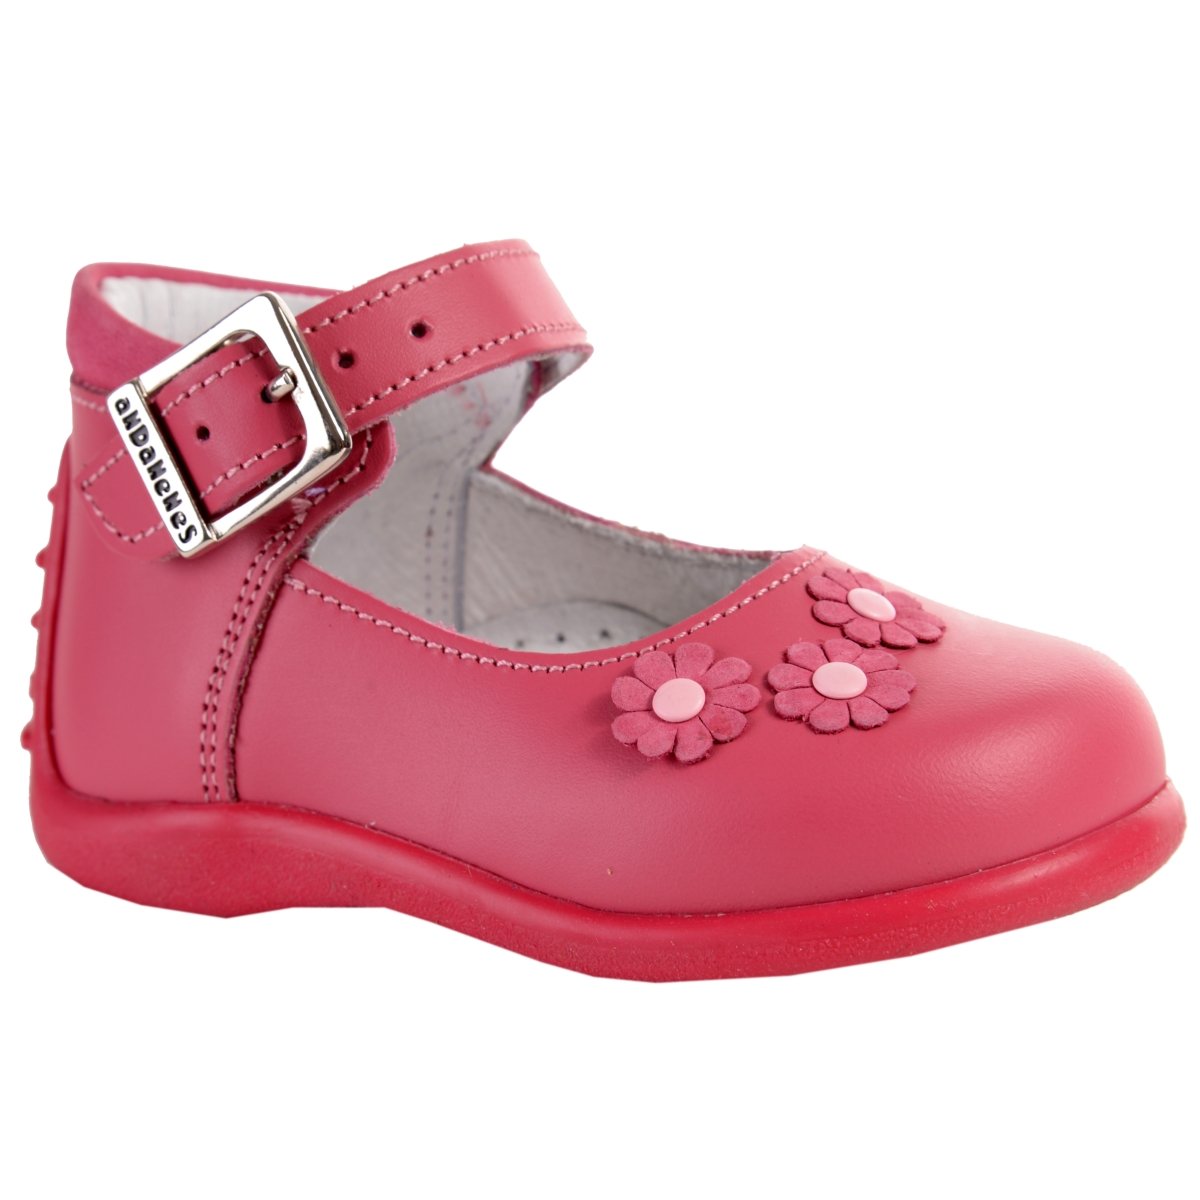 Zapato Mary Janne Flores 12-15 Mod. 6047A50